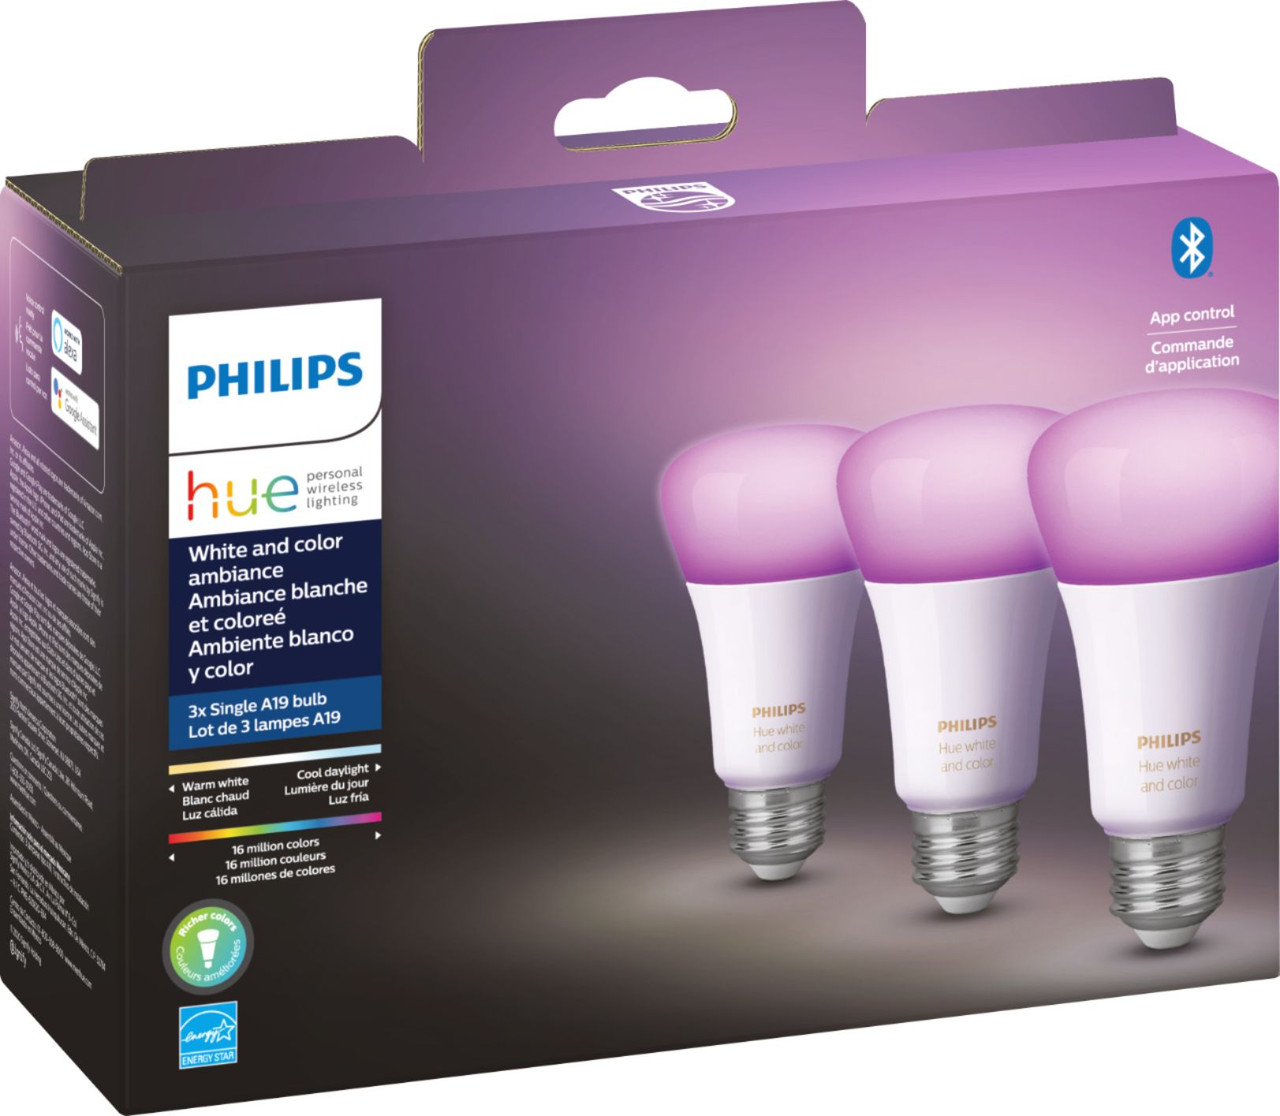 Philips - Hue White & Color Ambiance A19 Bluetooth LED Smart Bulb (3-Pack) - Multicolor